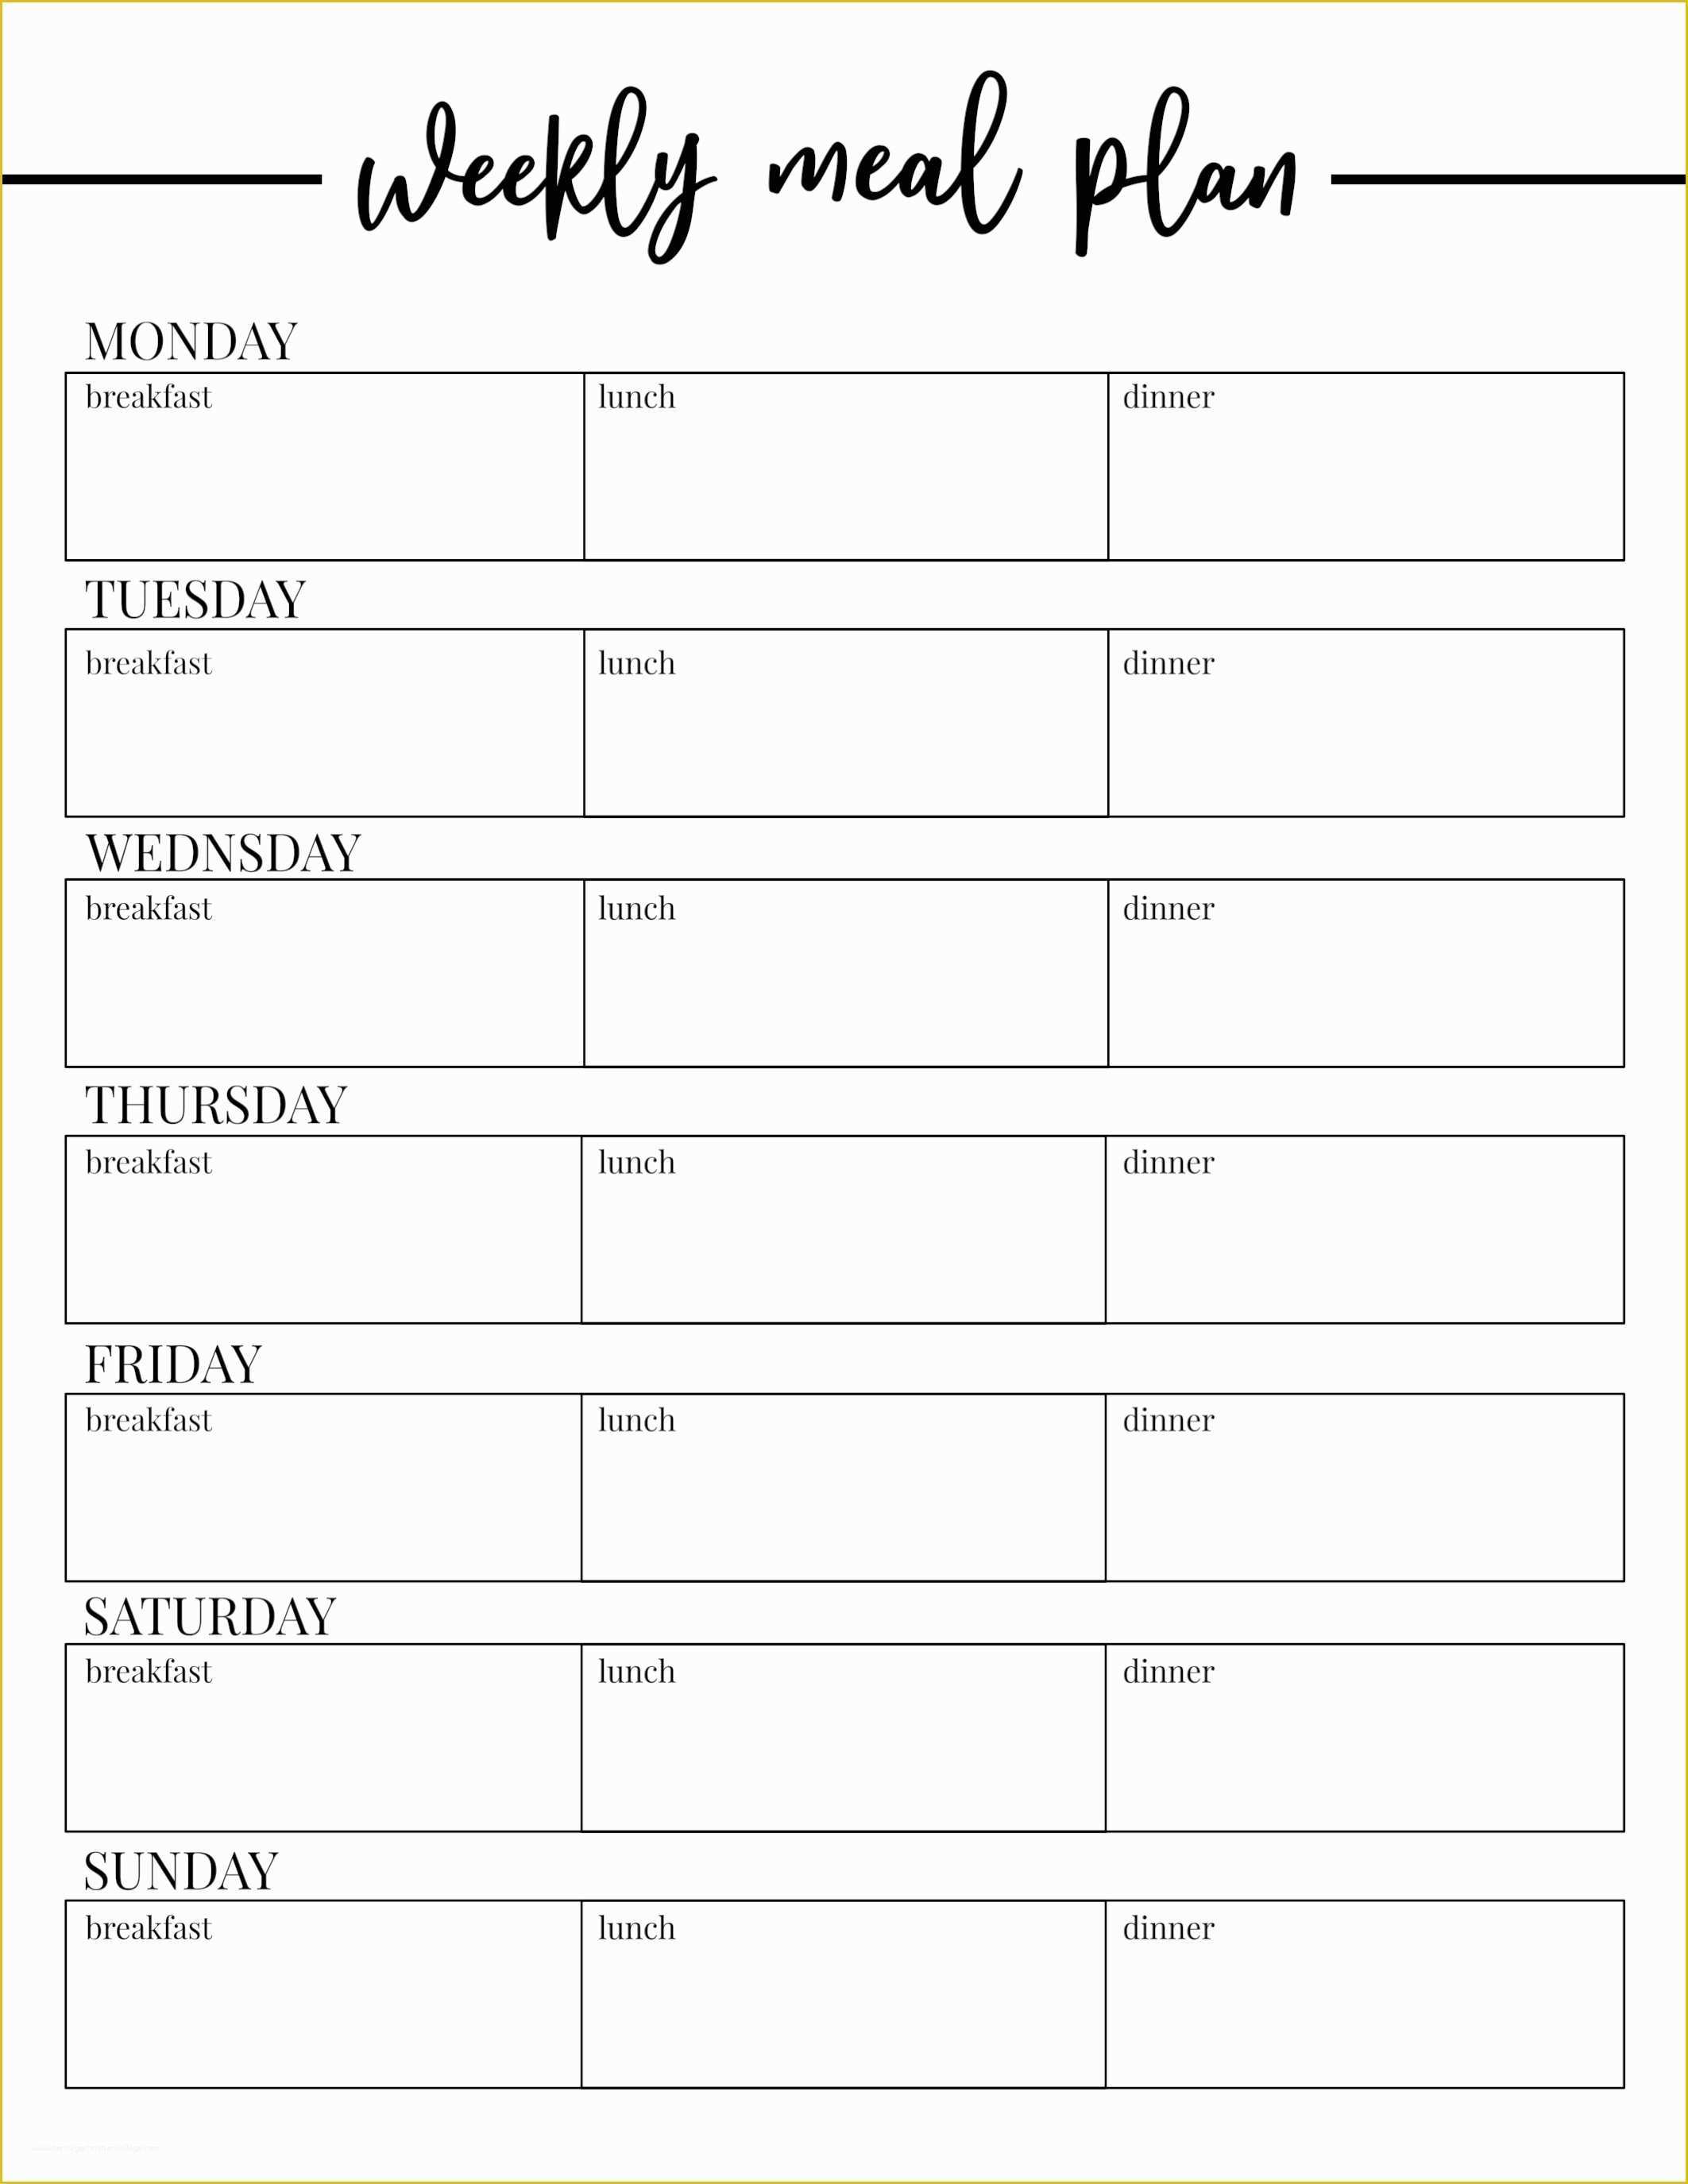 Free Weekly Meal Planner Template Of Free Printable Weekly Meal Plan Template Paper Trail Design